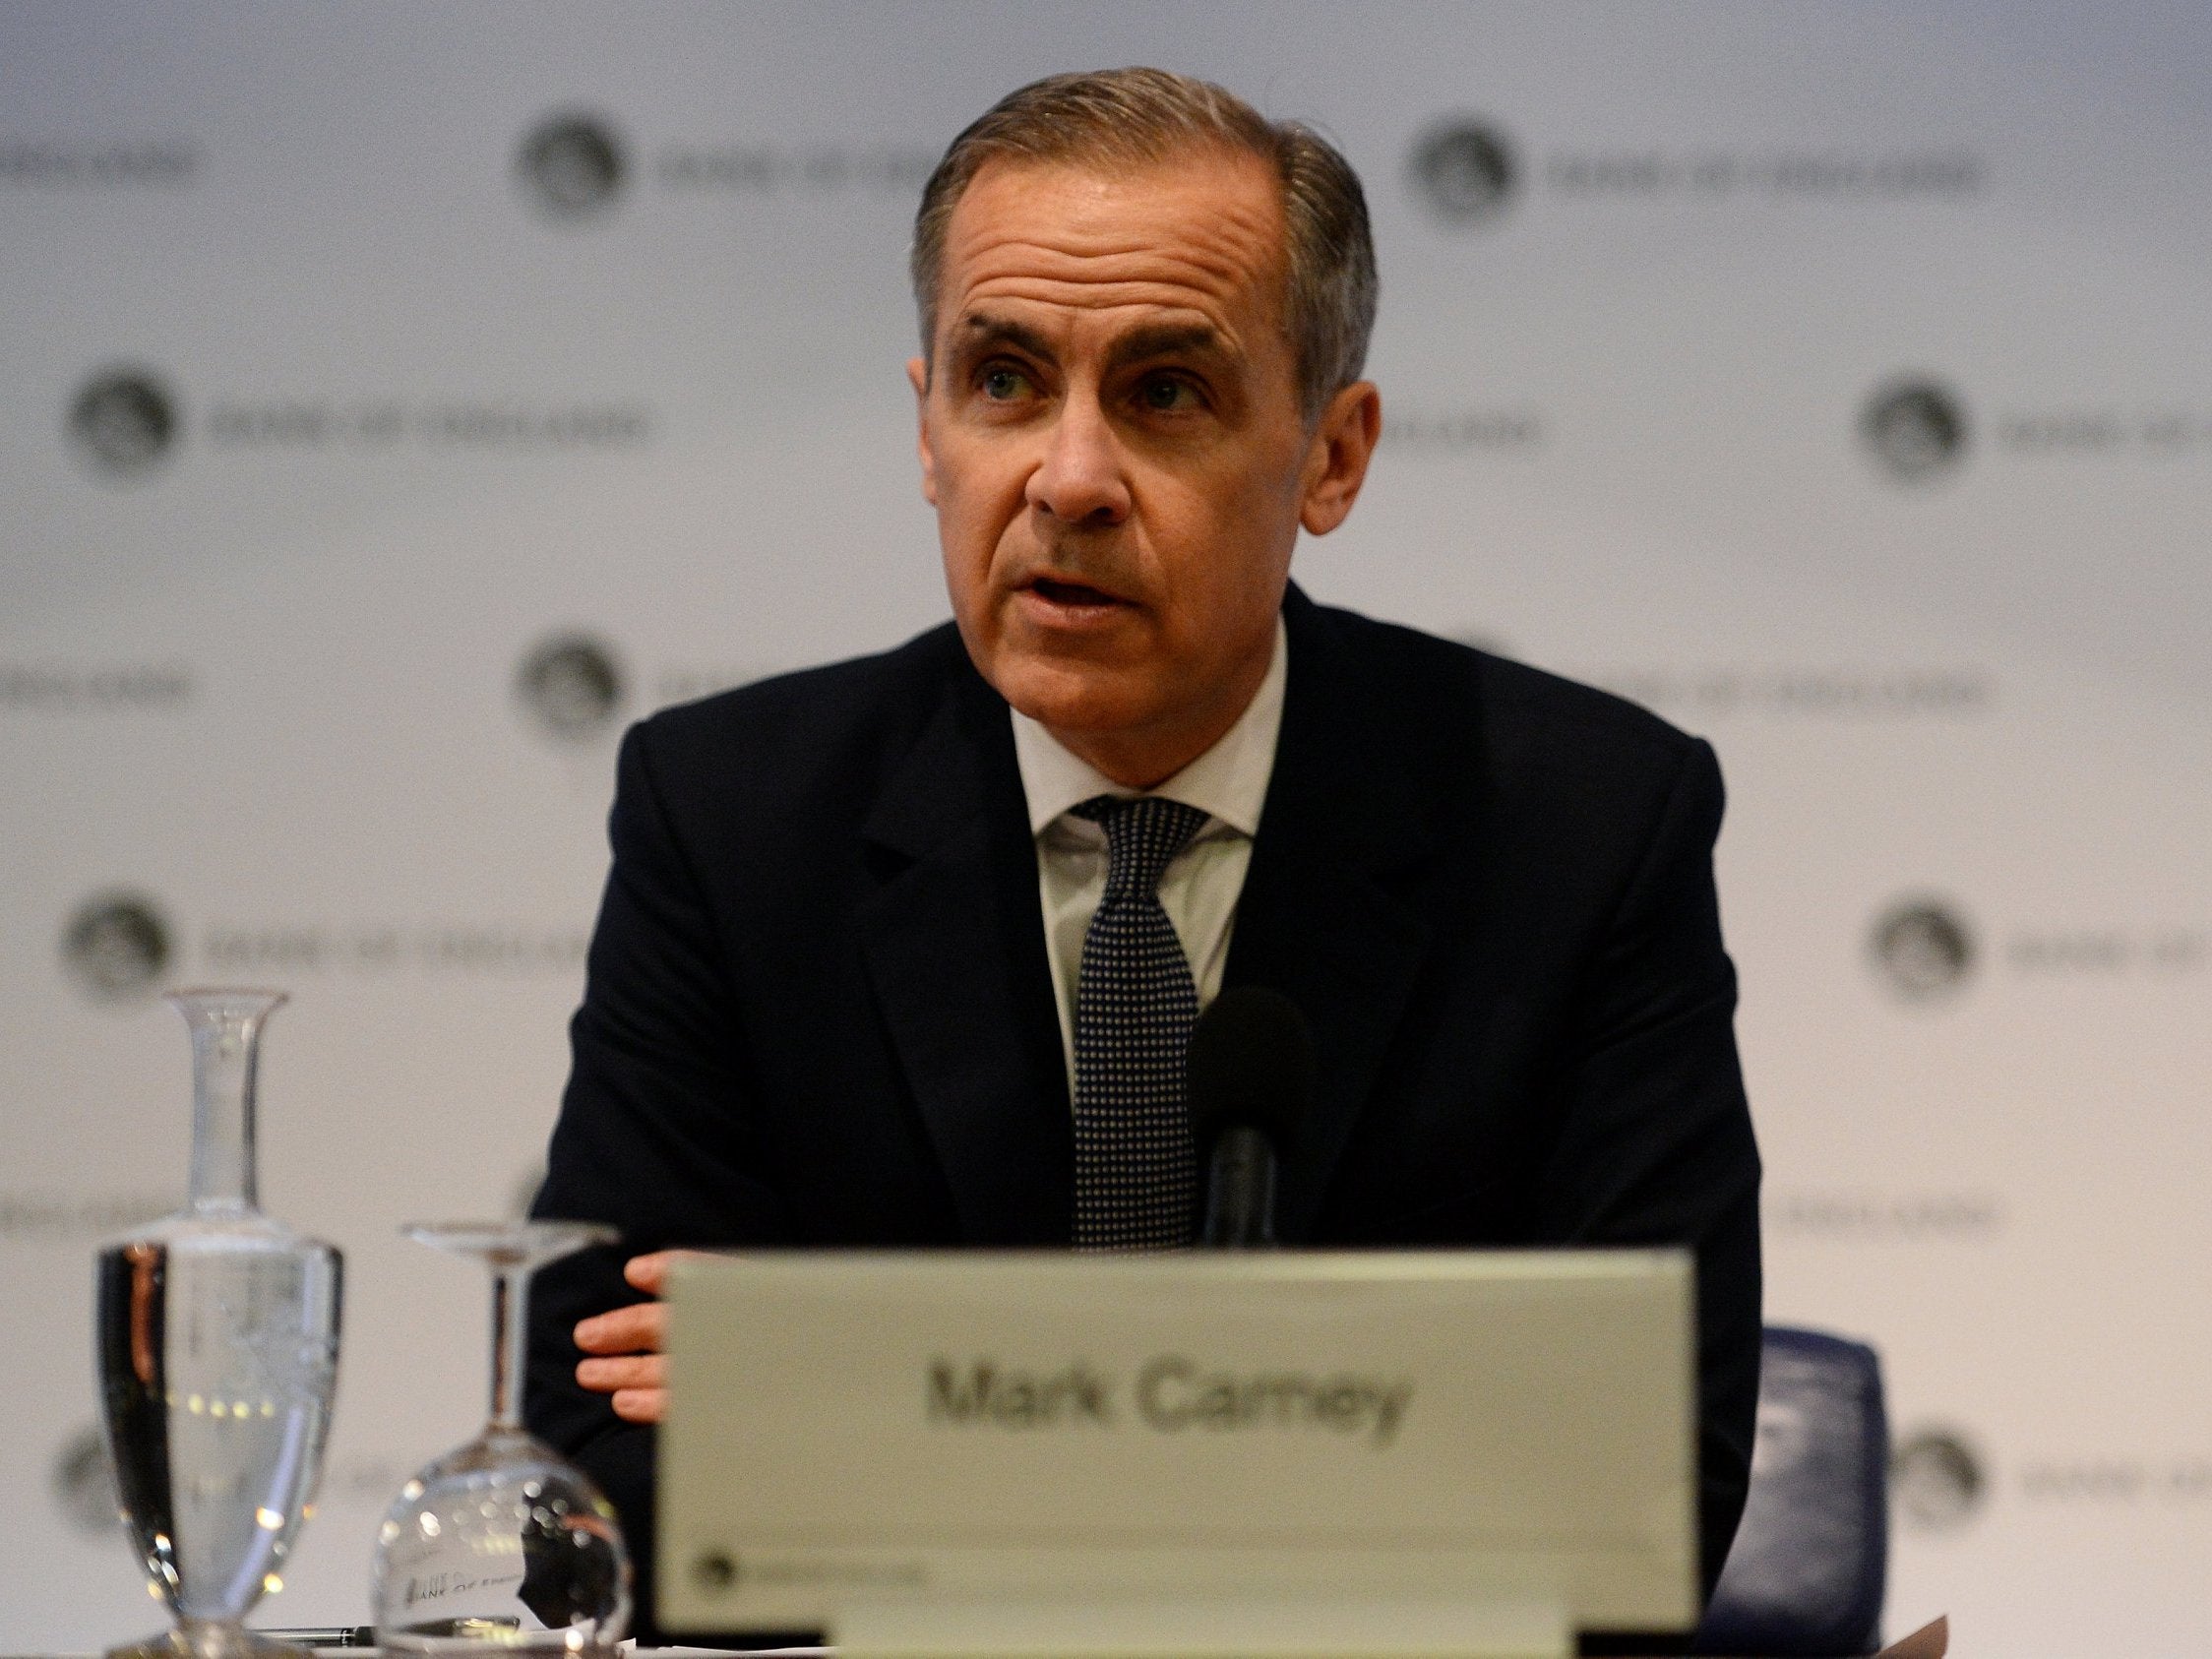 The Bank of England governor warned of an instant shock to the economy in a no-deal scenario